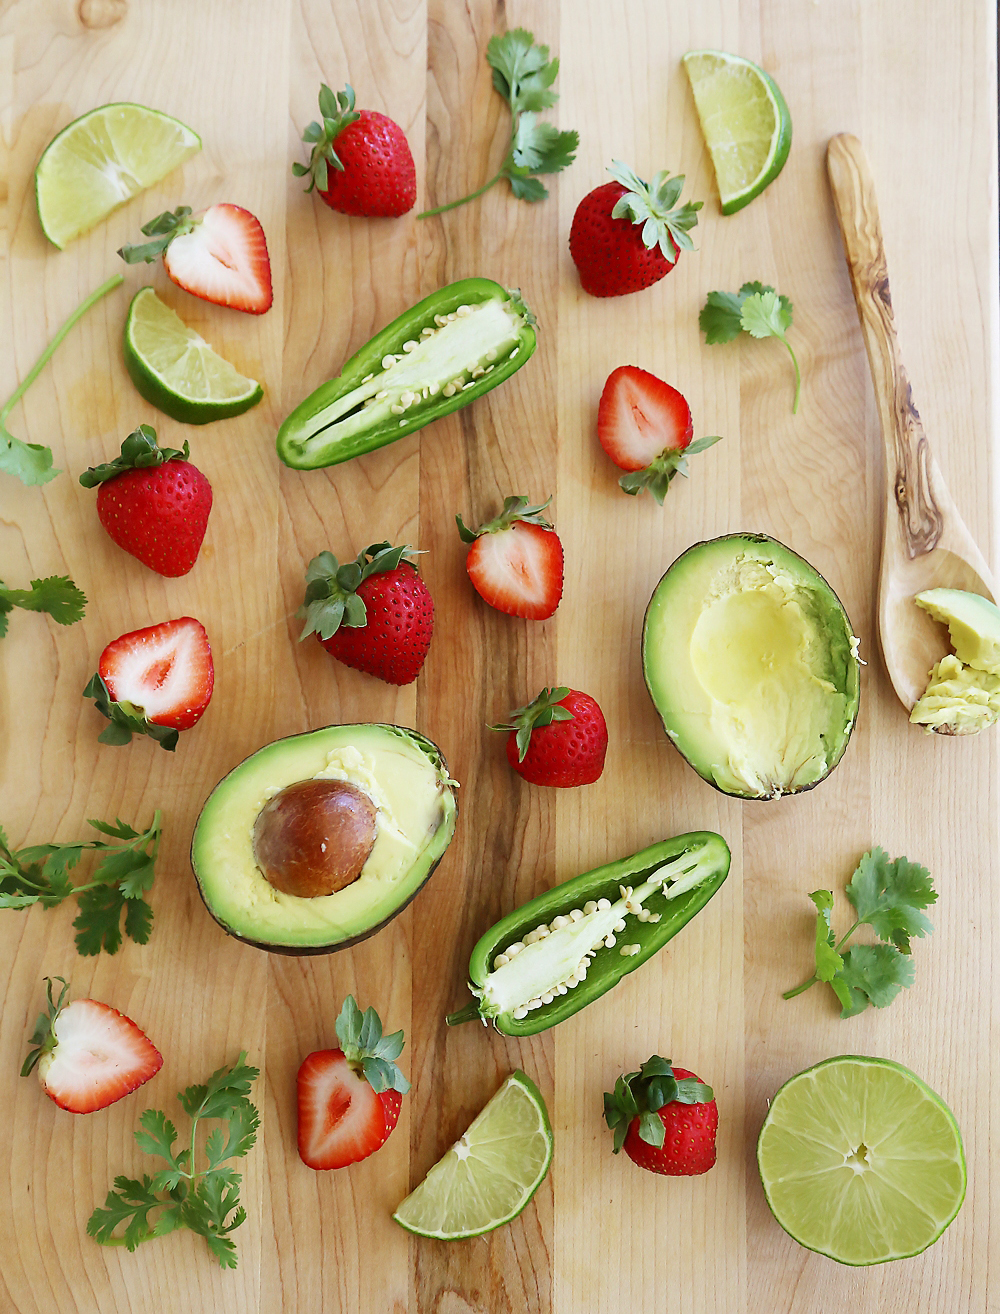 Strawberry Jalapeño Avocado Salsa - The perfect summer salsa! Serve with tortilla chips for snacking, or on the side of grilled meats, steak and fish. thecomfortofcooking.com